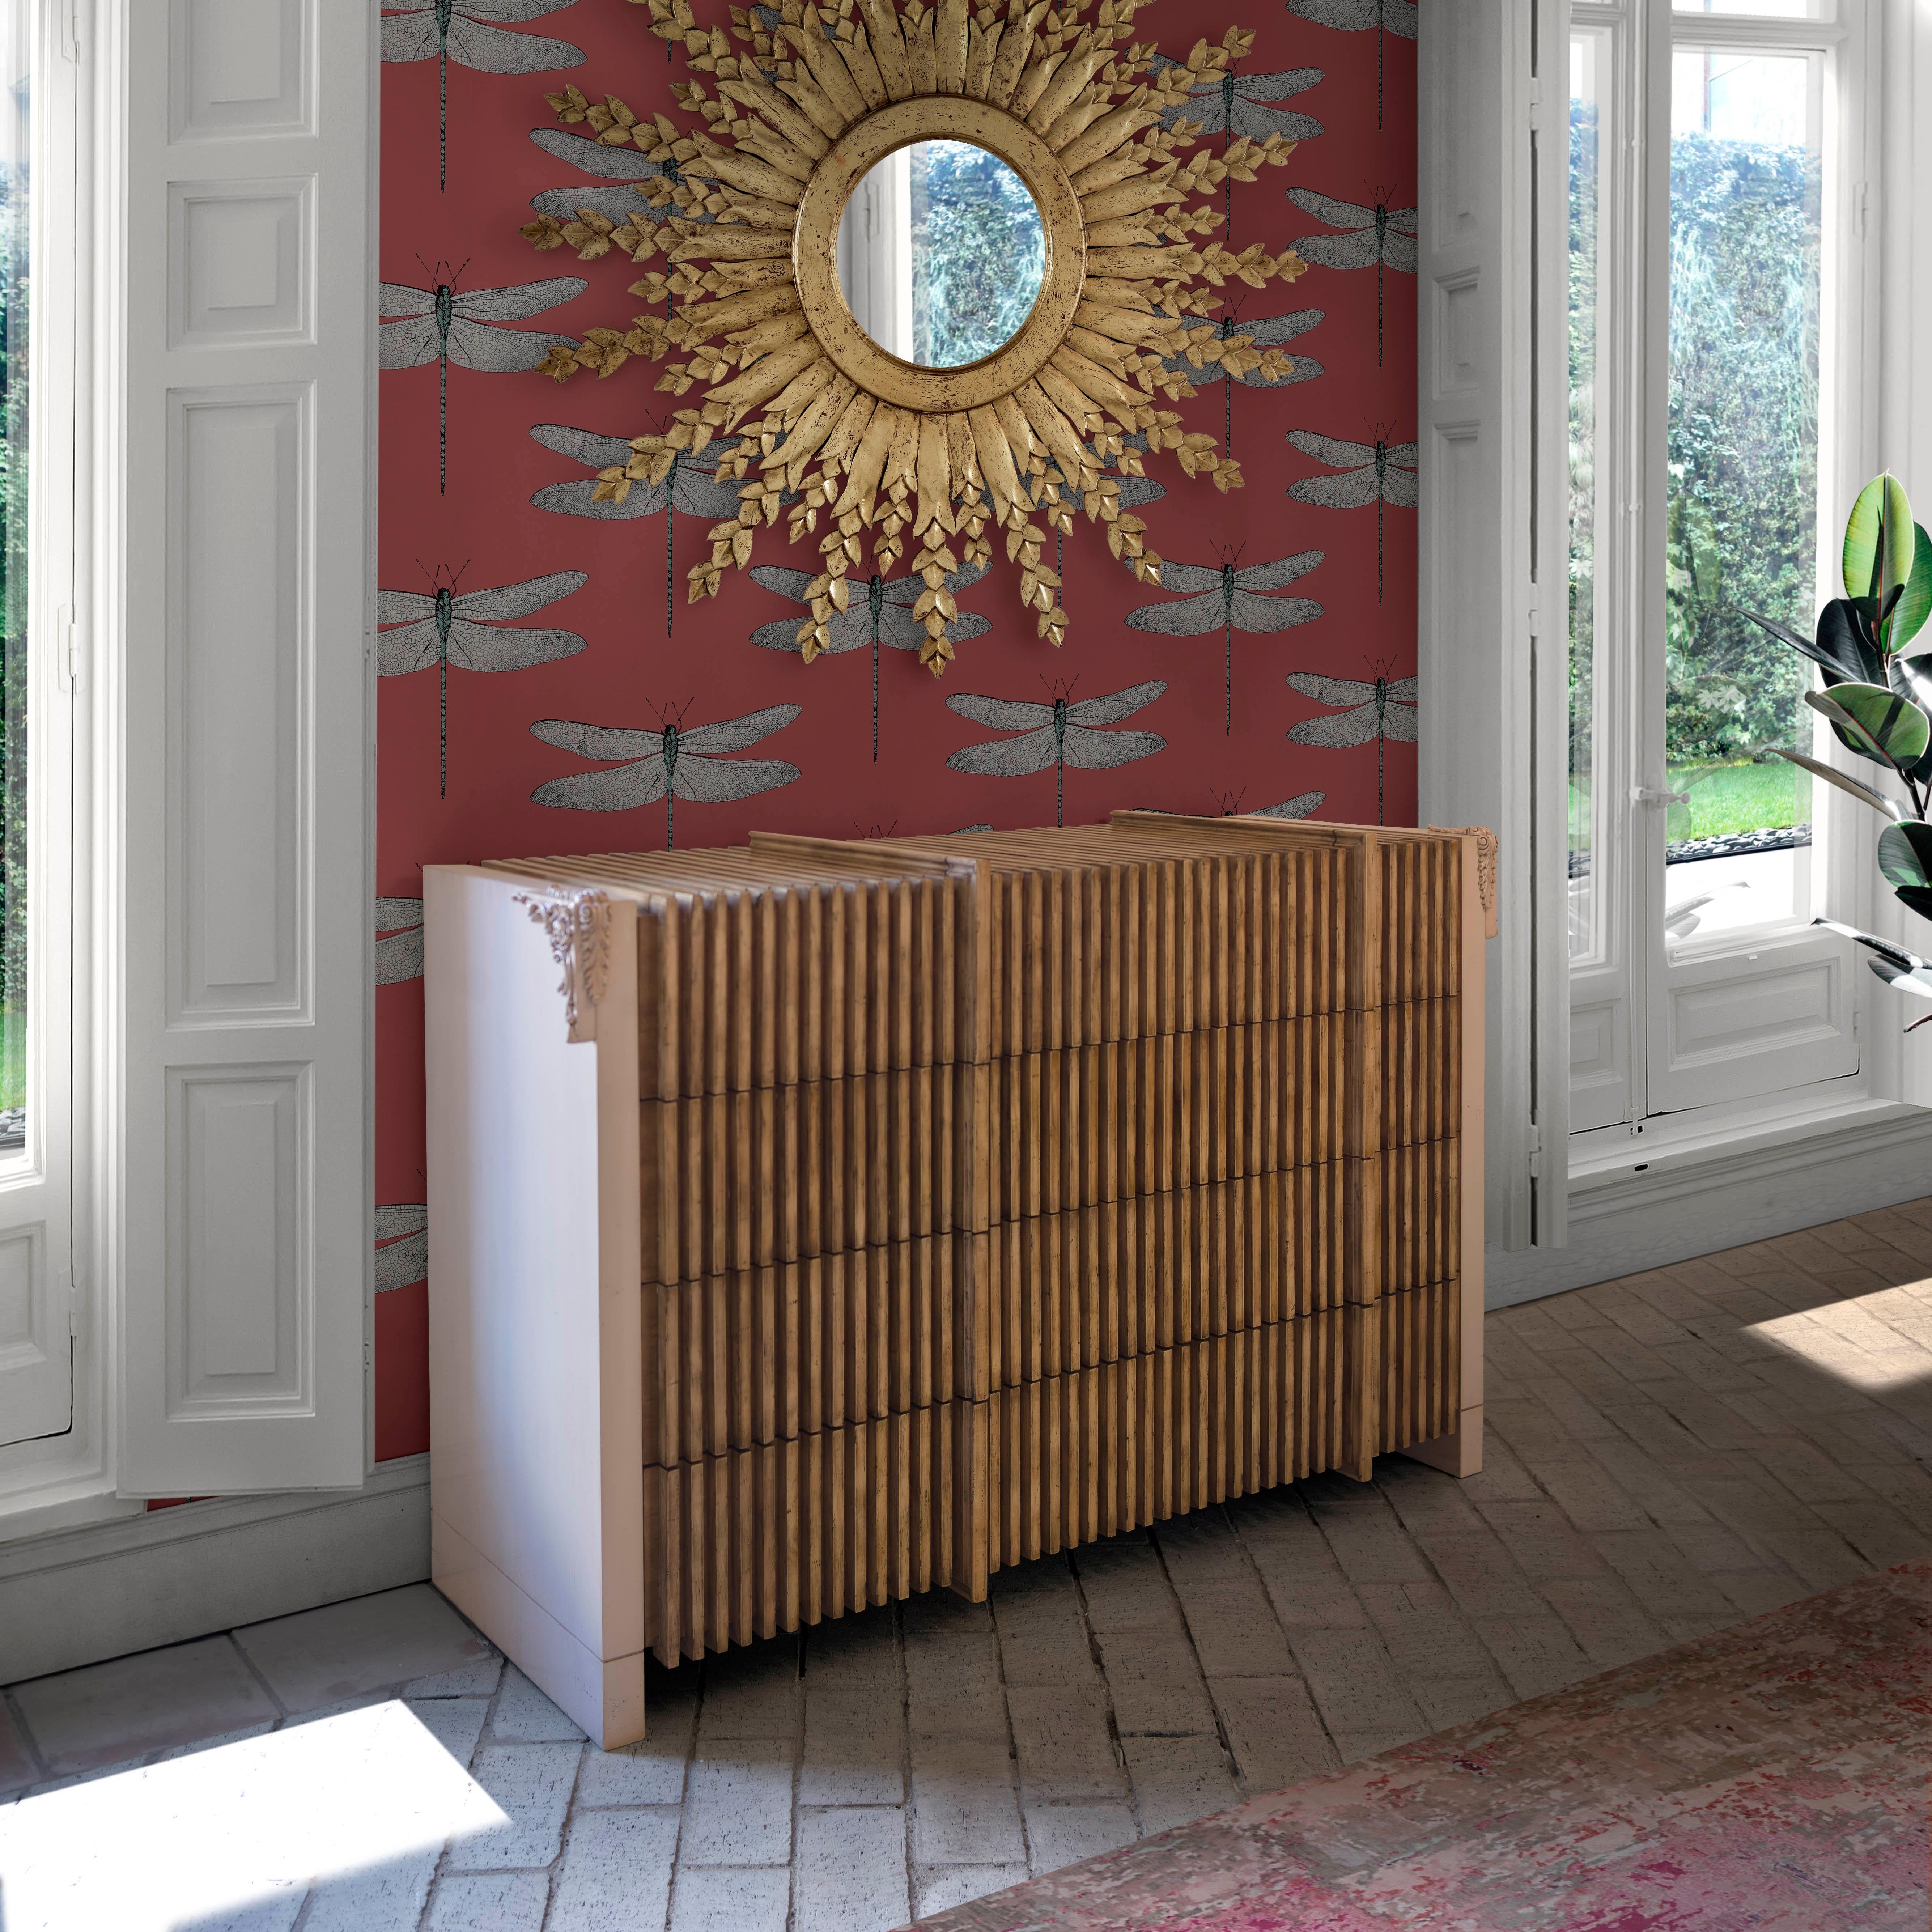 At Lola Glamour we flee from conventions and decorative heterogeneity. We like to dream impossible dreams and make them come true. As is the case with this chest of drawers, complex and diligent, with four drawers and sides that extend to support